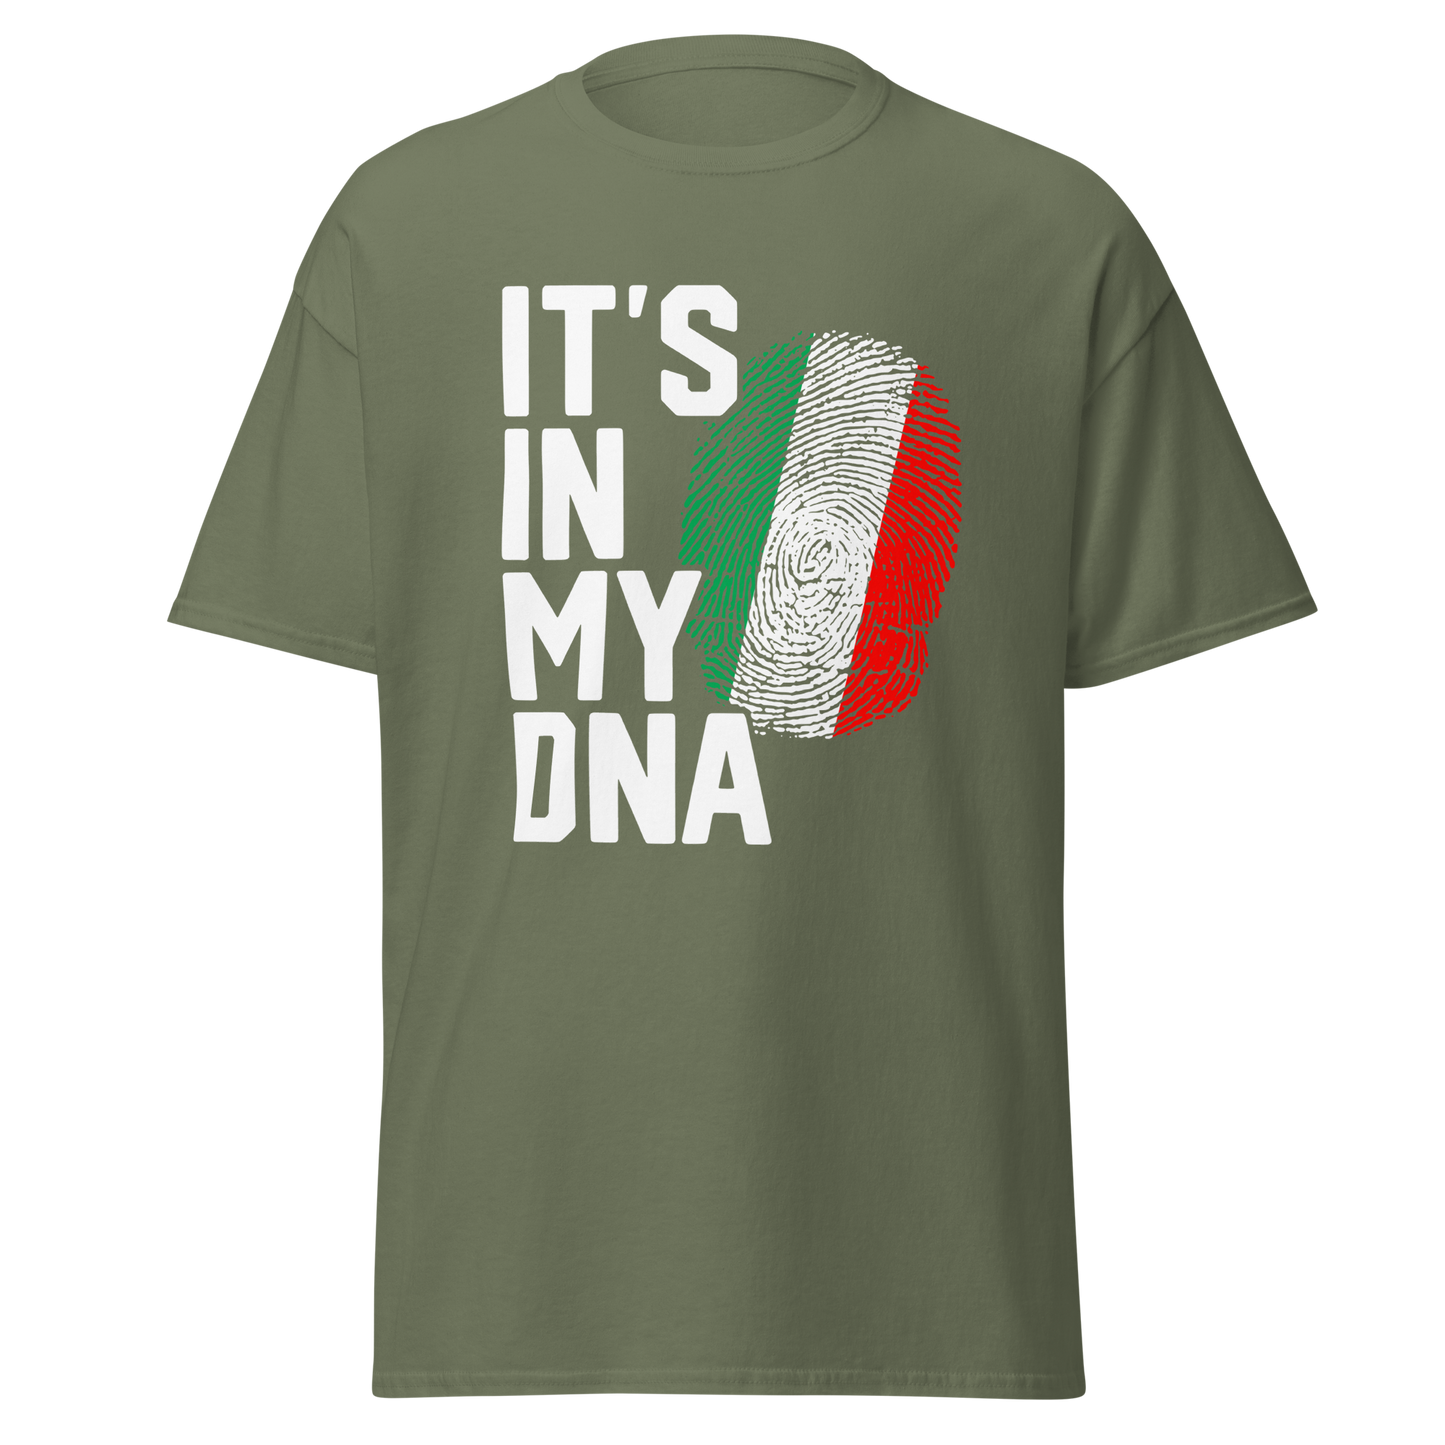 It's In My DNA Italian Flag Fingerprint T-Shirt: Embrace Your Heritage in Style - Vintage Tee for Italians